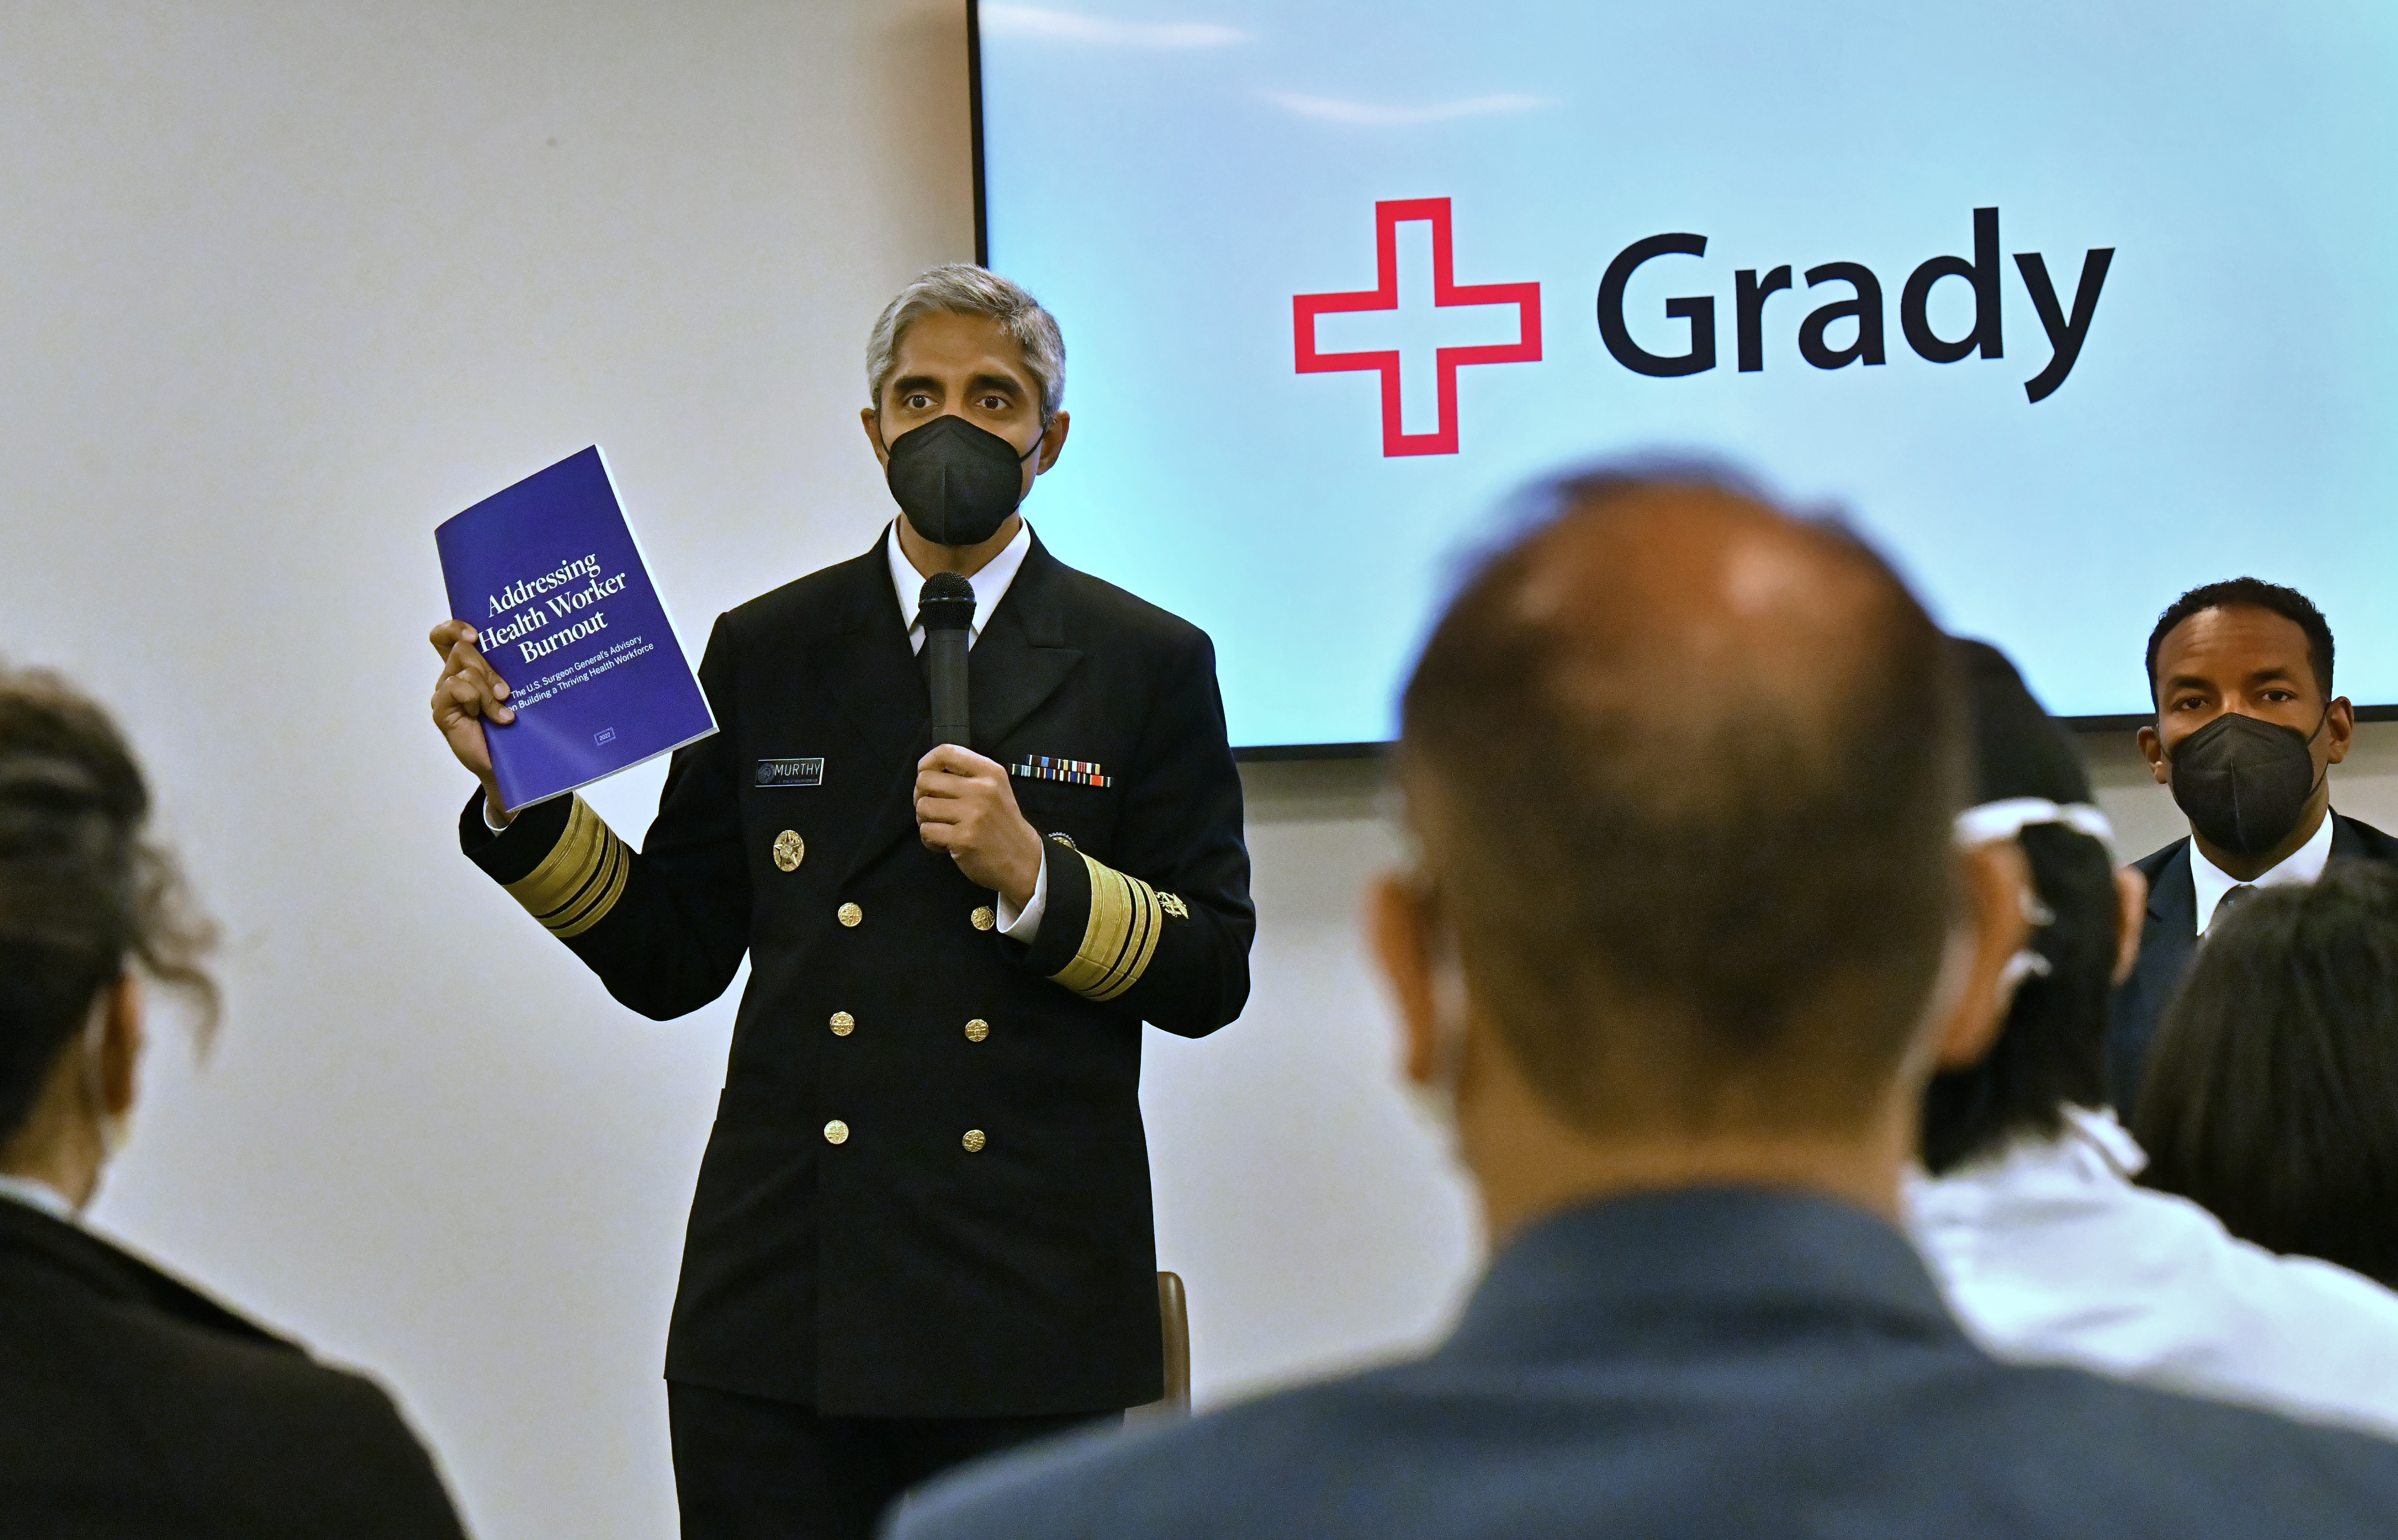 May 26, 2022  Atlanta - U.S. Surgeon General Dr. Vivek Murthy holds a a copy of a study and advisory released this week by his office to address healthcare workers’ burnout. He spoke to workers at Grady Memorial Hospital on Thursday, May 26, 2022. (Hyosub Shin / Hyosub.Shin@ajc.com)